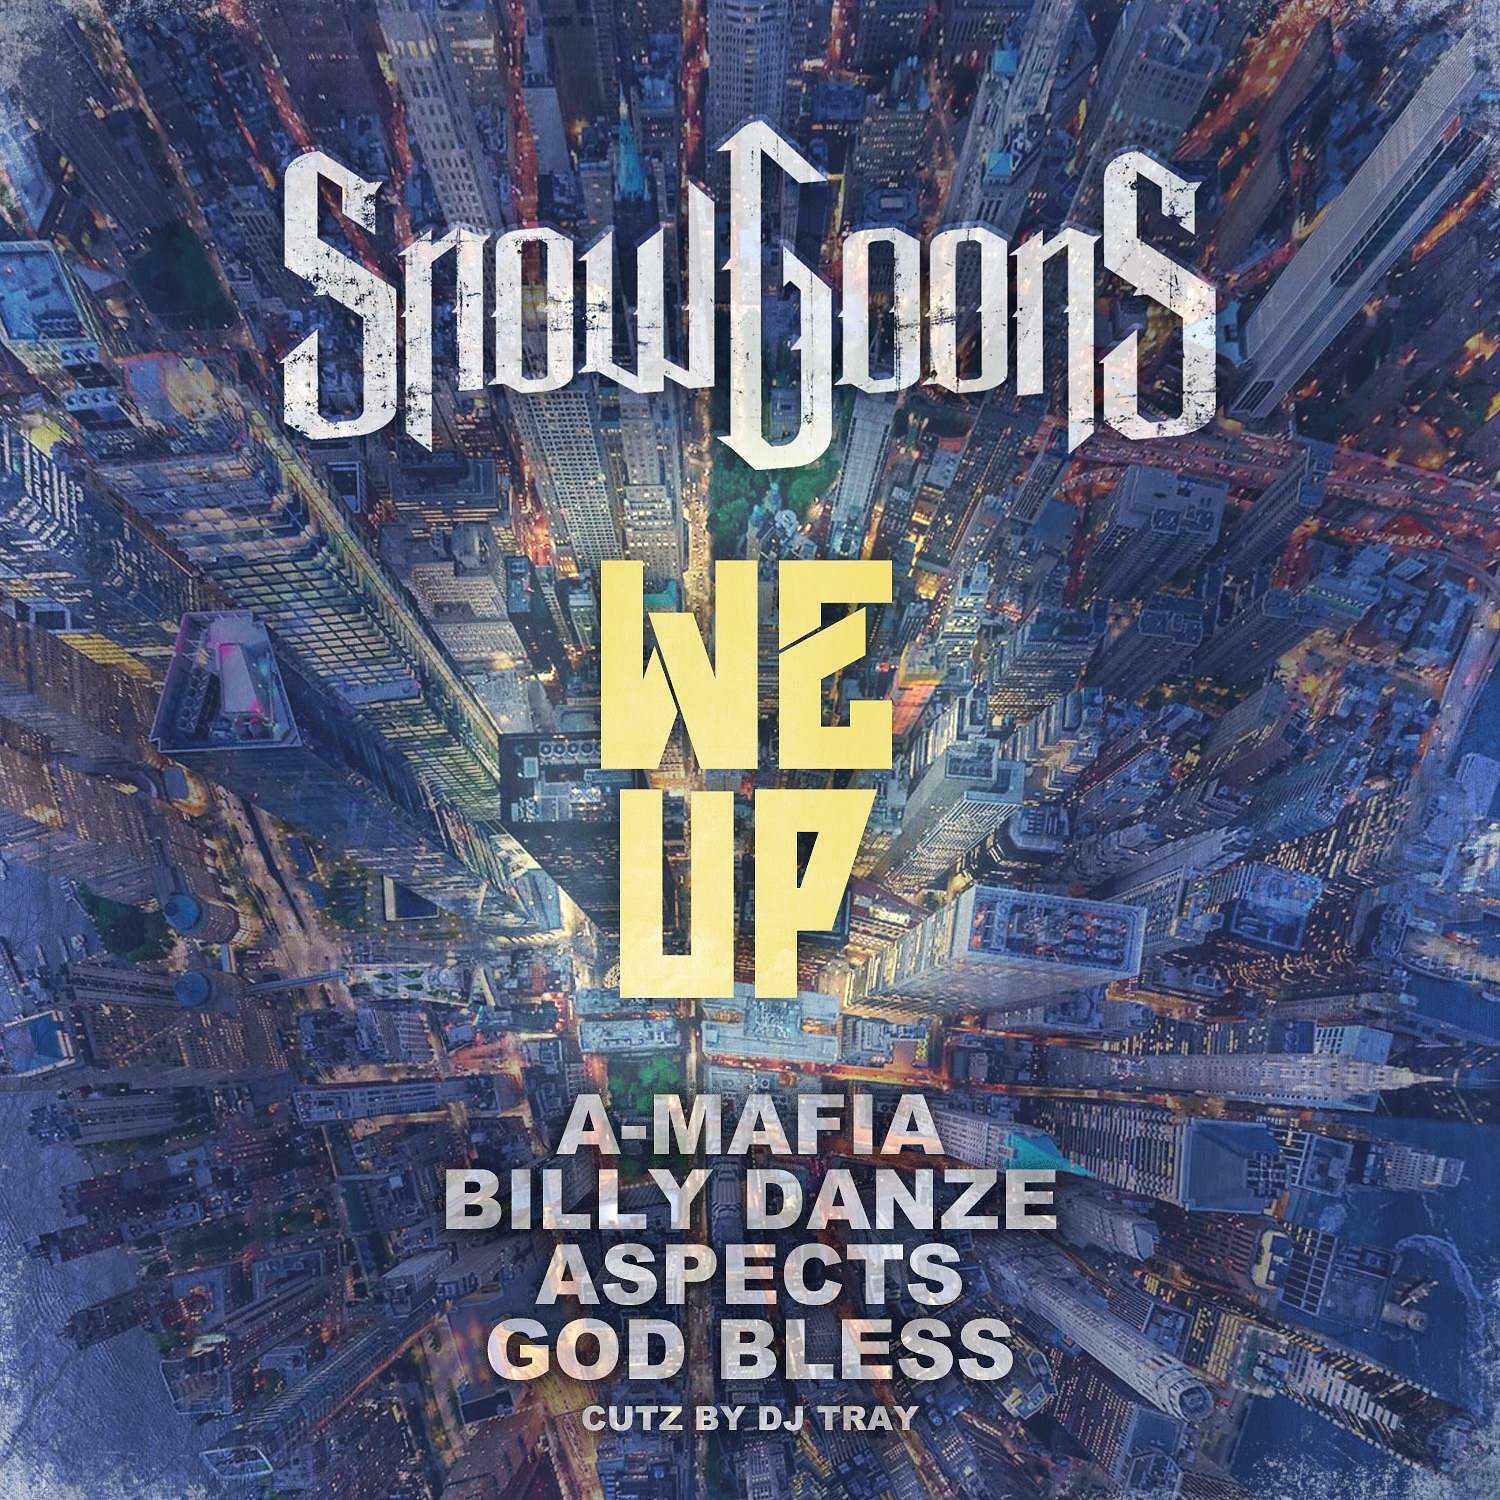 MP3: Snowgoons feat. A-Mafia, Billy Danze, Aspects, & God Bless - We Up